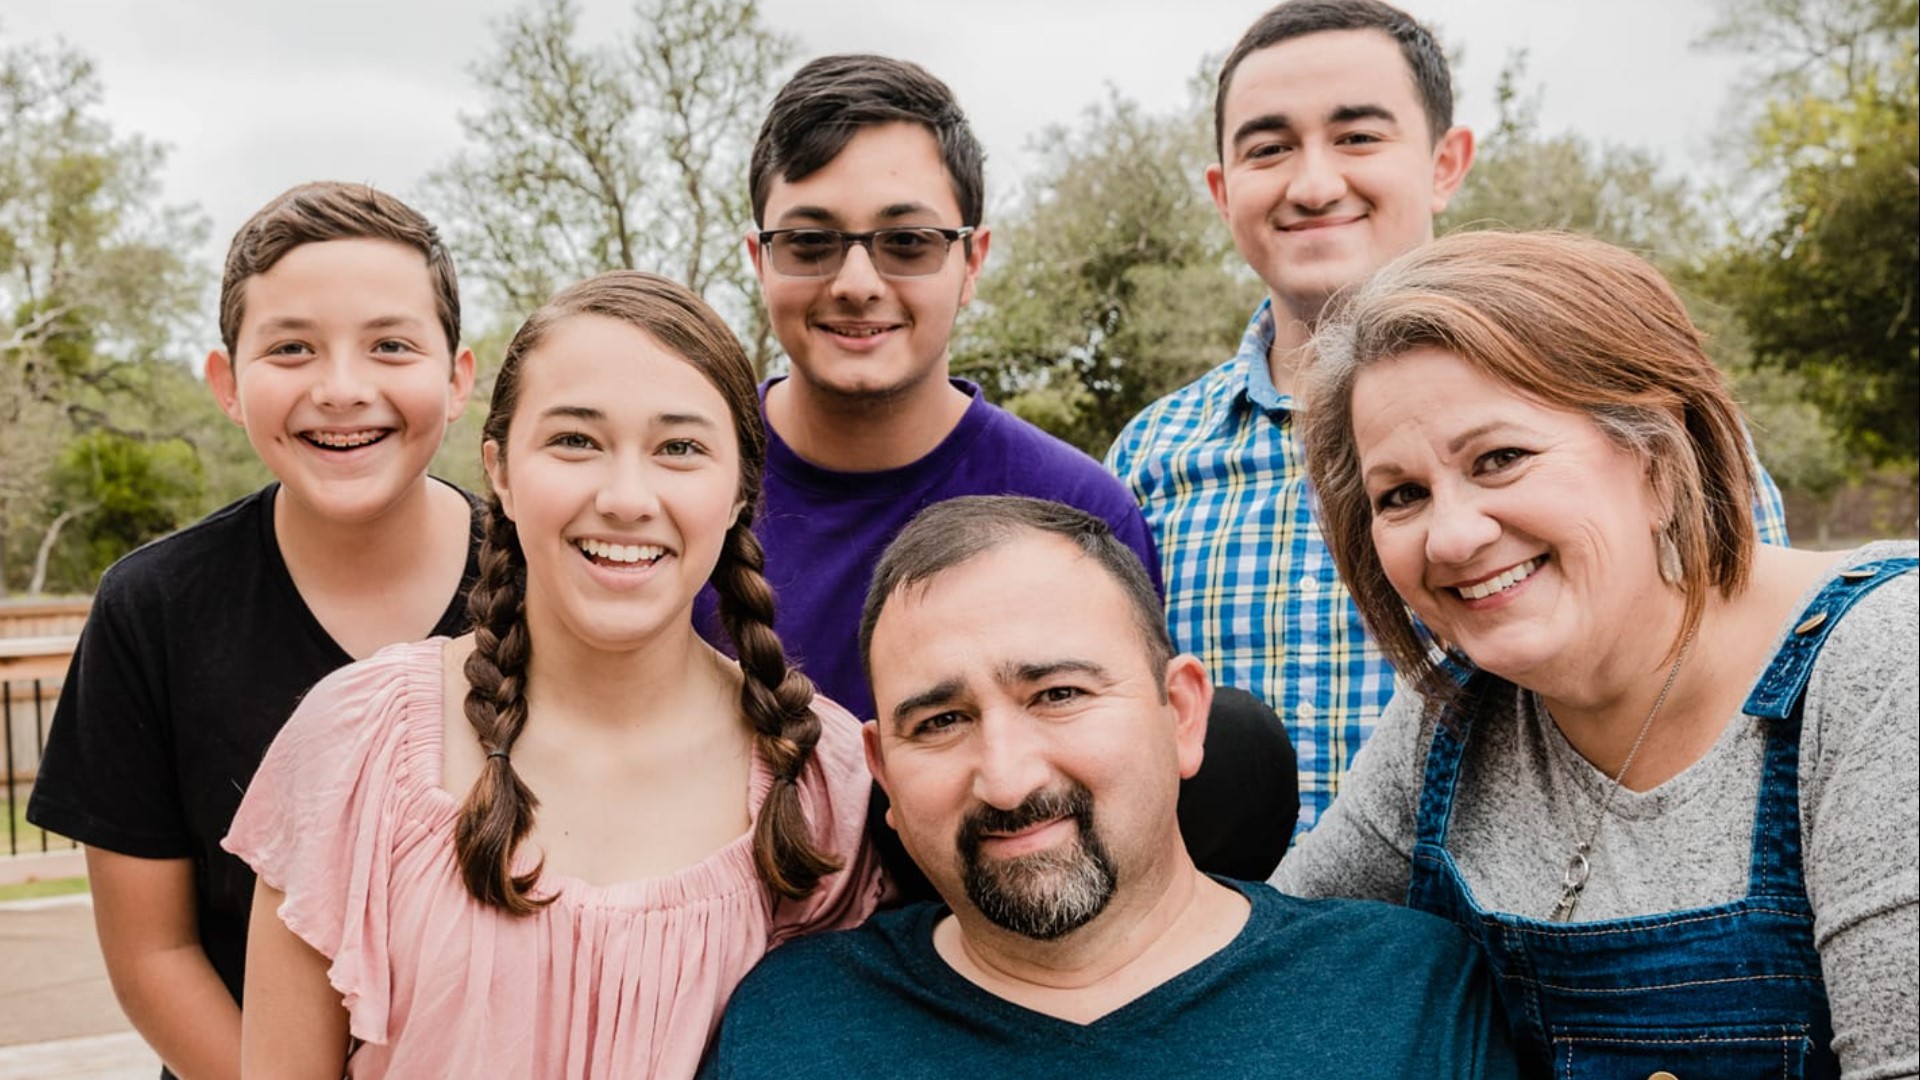 Juan and Meg Reyes adopted three siblings and gave them a forever home. The family is leaning on one another as Juan battles ALS.